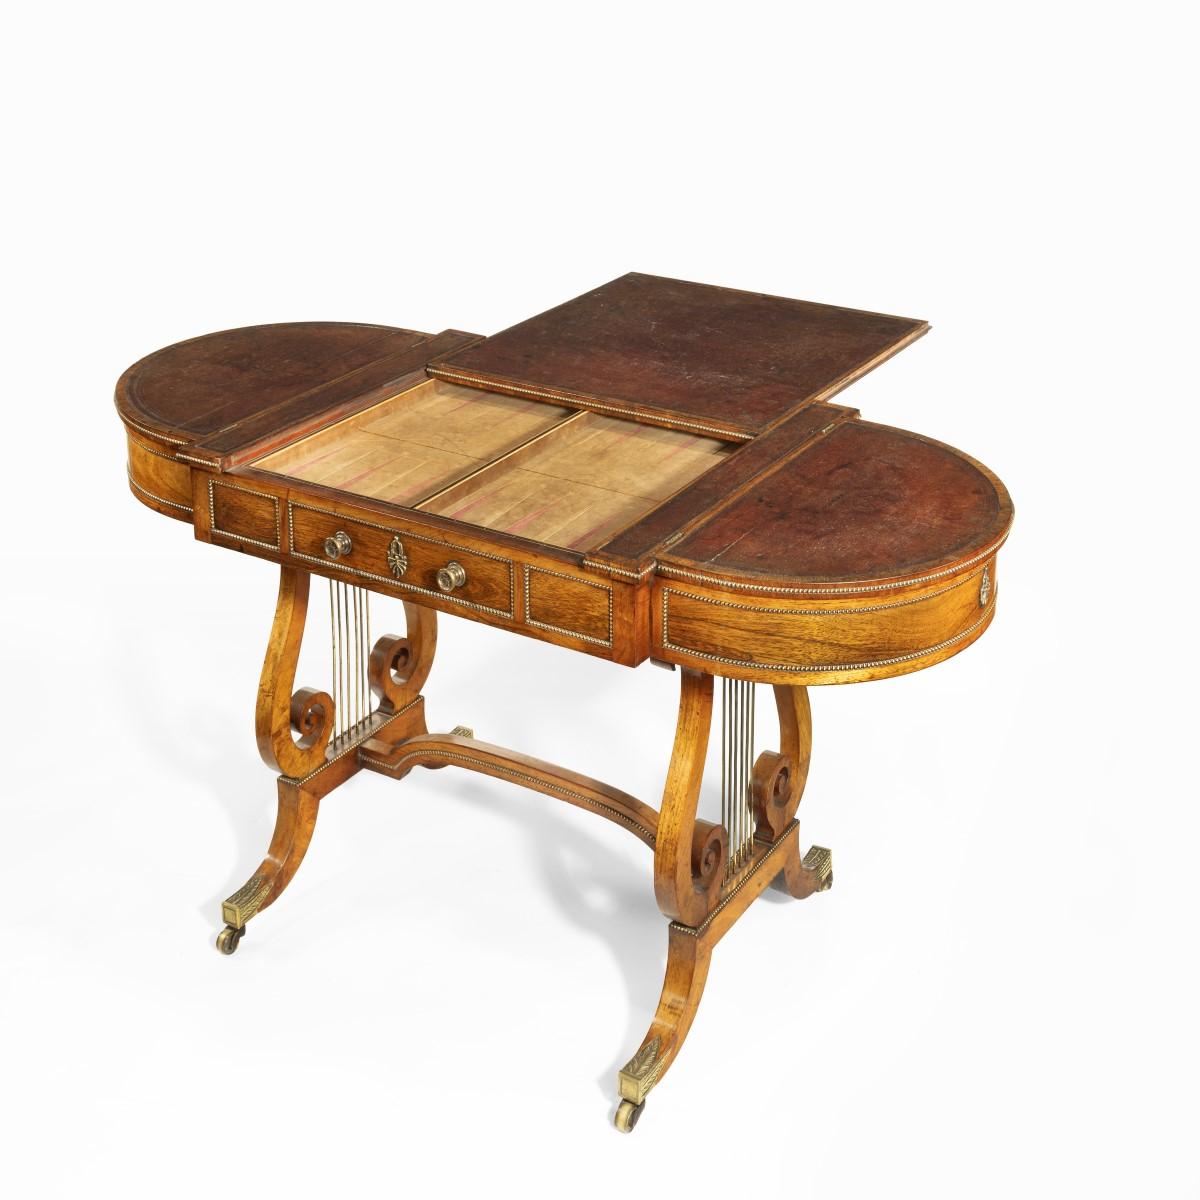 A Regency period rosewood sofa games table attributed to Gillows of Lancaster; the top with rounded ends covered in the original distressed leather, with a central reversible chess board which can be removed to display a backgammon board beneath,